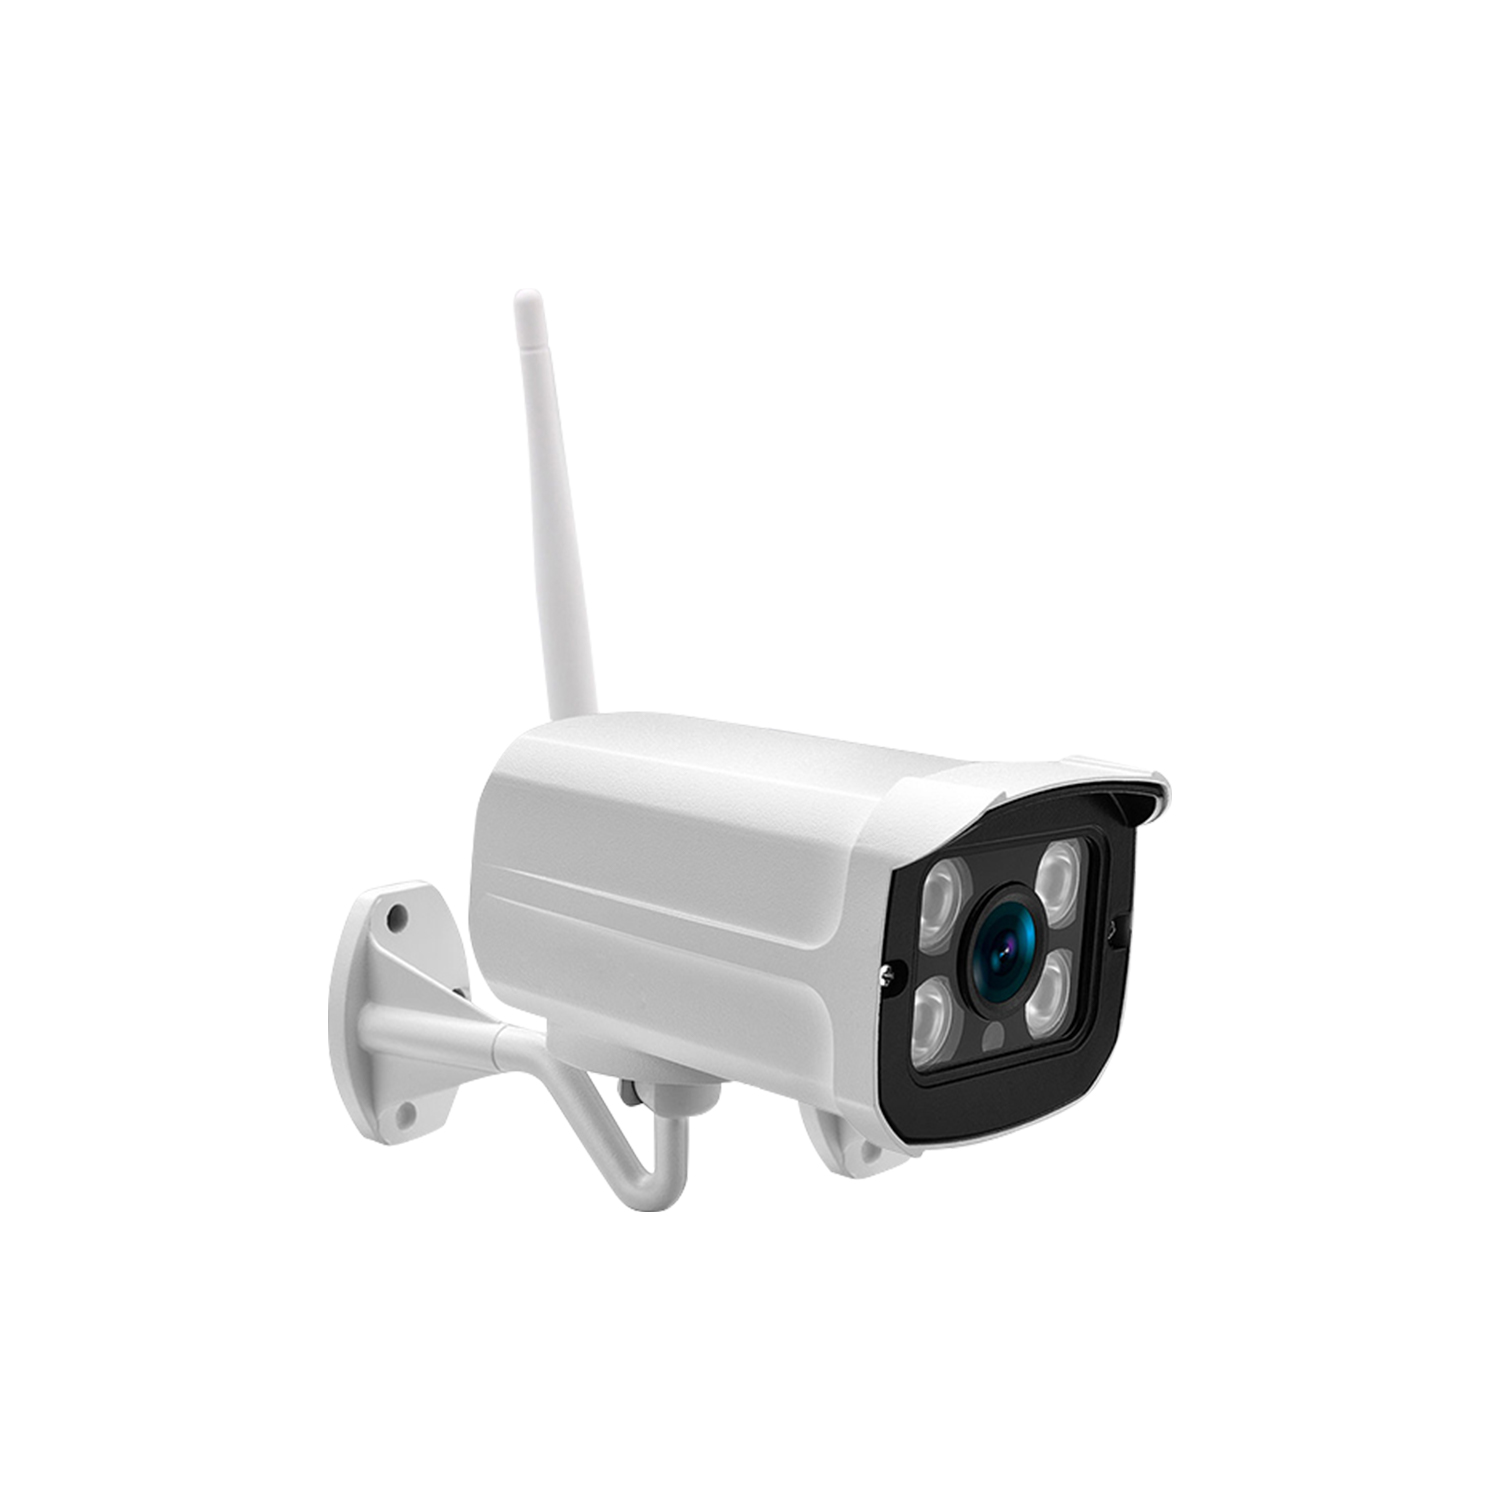 Hankvision WiFi NVR Kit 4CH 2MP/3MP/5MP with 4pcs IP Cameras WIreless Kit Support up to 6TB HDD TUYA